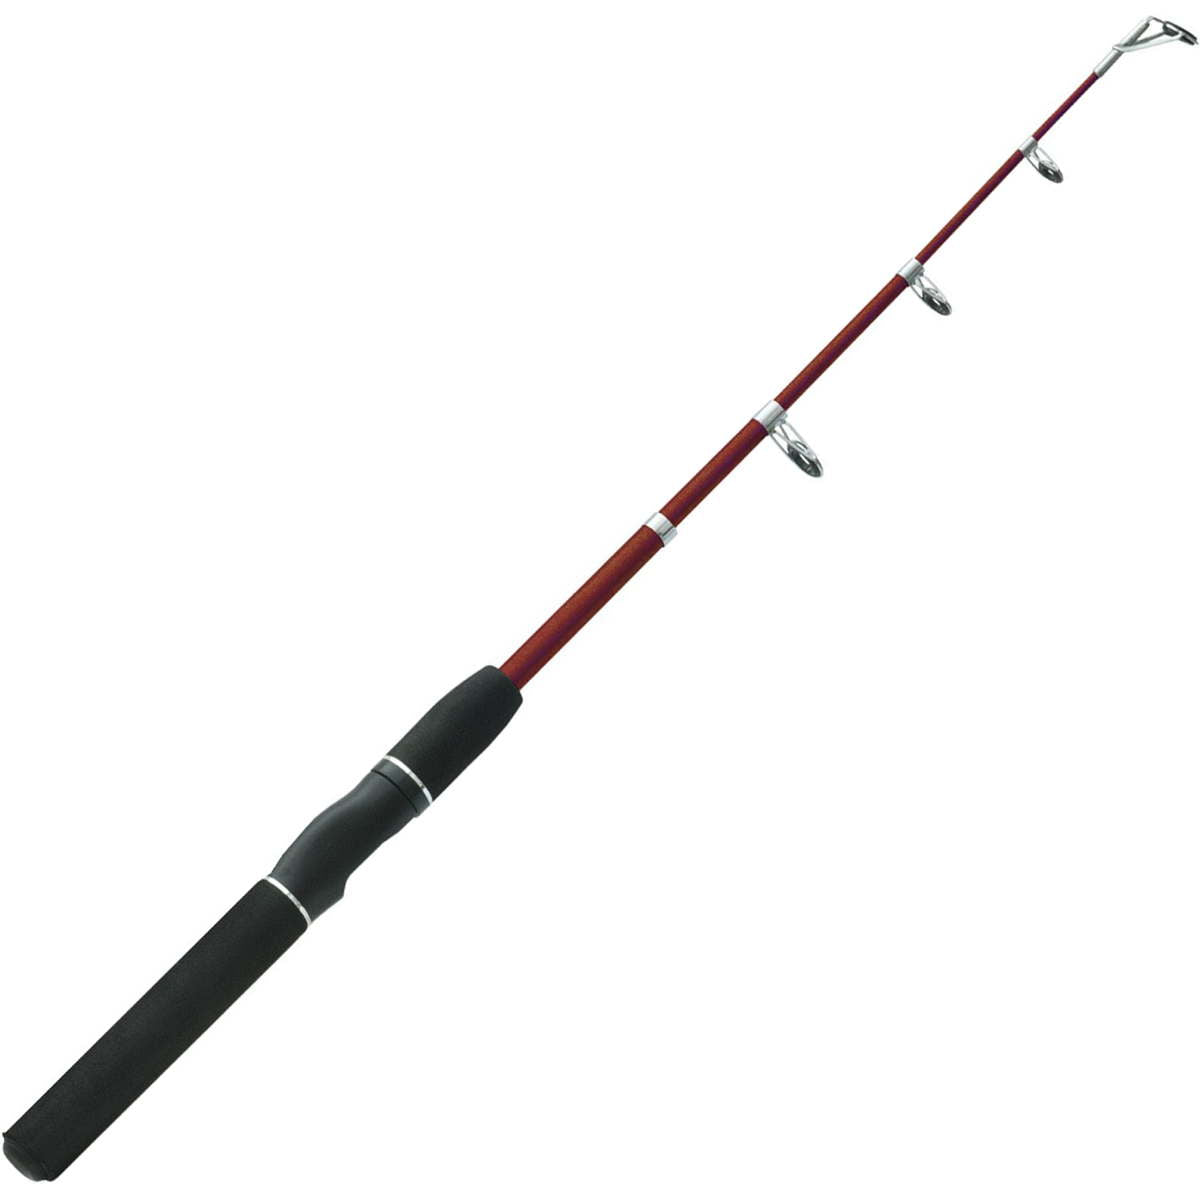 Photo of Zebco Z-Cast Series Telescopic Spinning Rod for sale at United Tackle Shops.